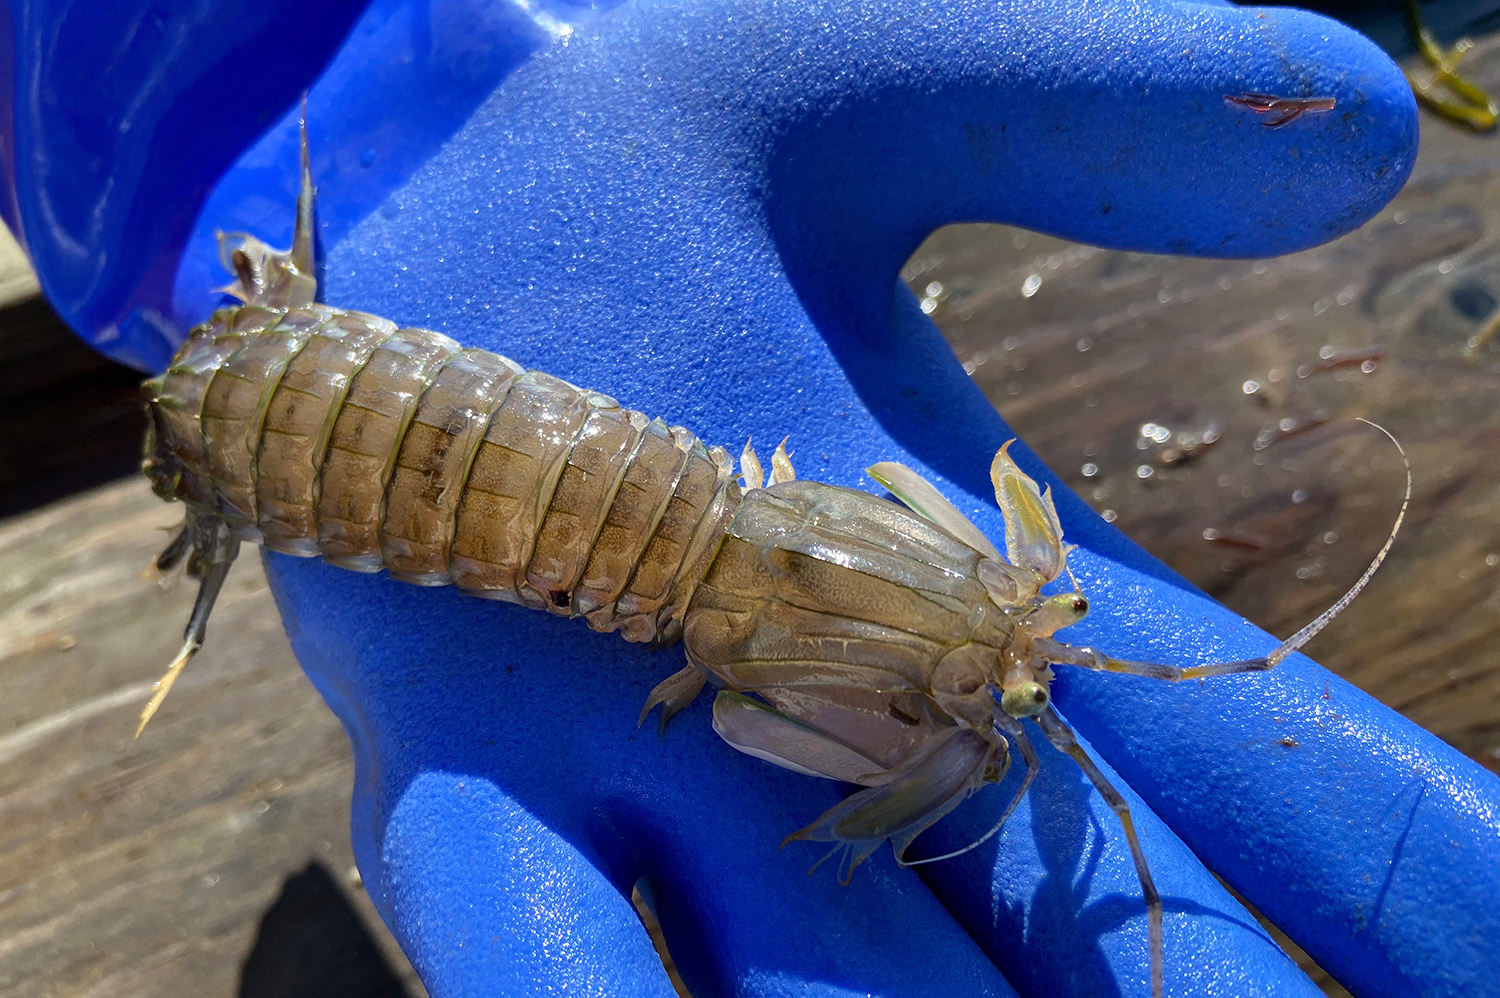 On the Water: Mysterious Shrimp